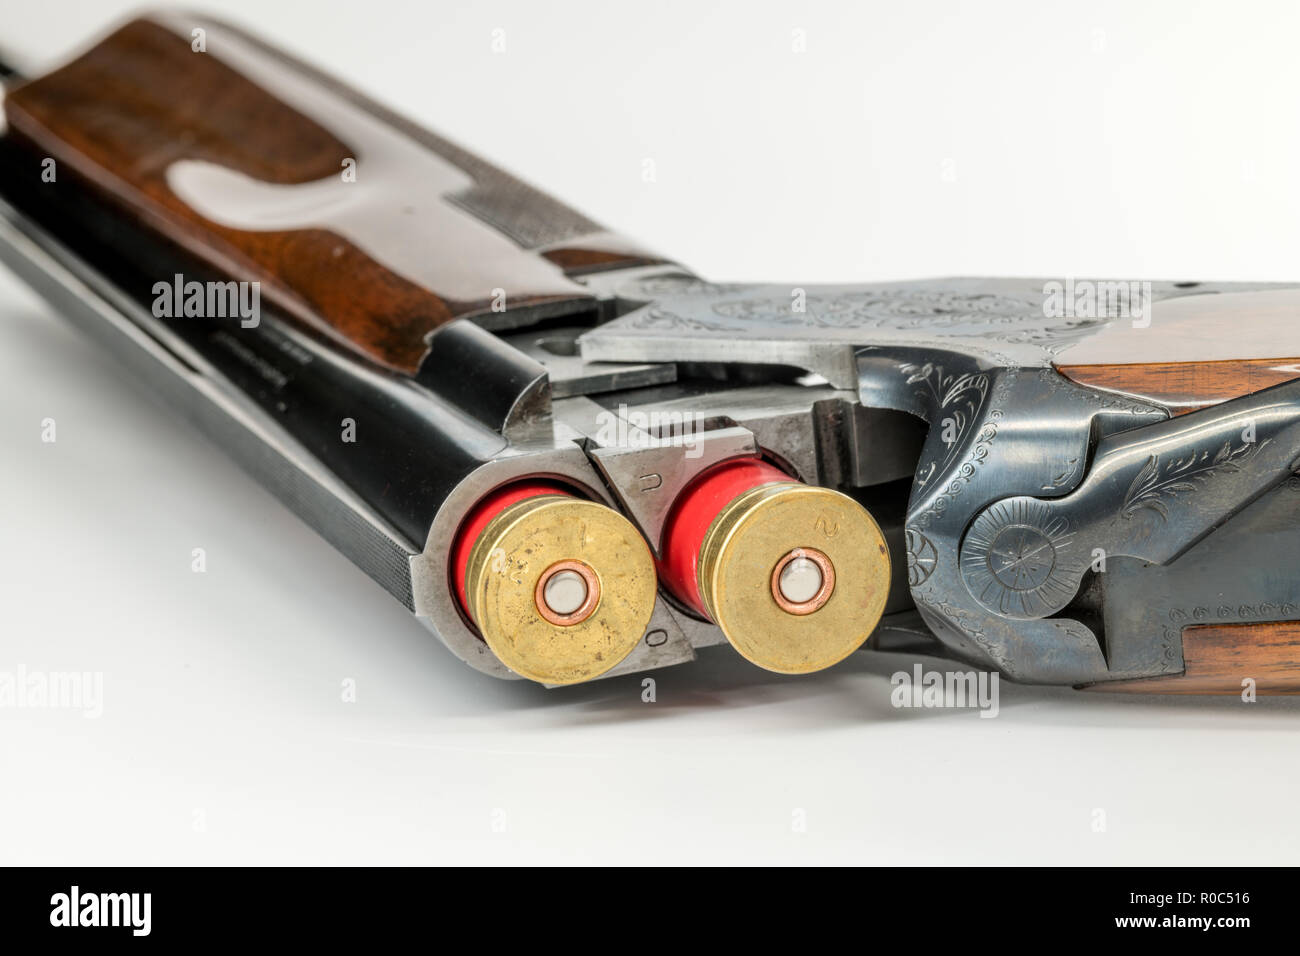 Classic shotgun with plastic bullets in the barrel ready to shoot Stock Photo